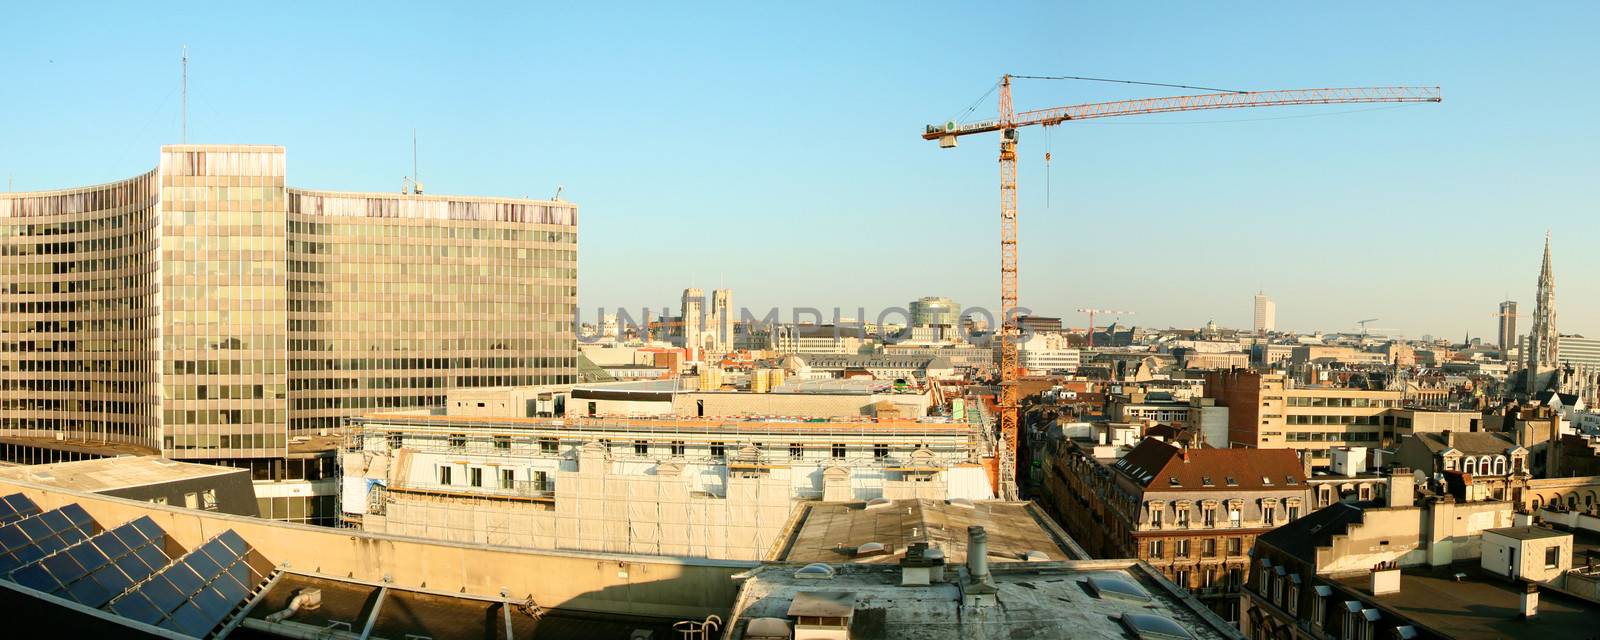 Architecture and panoramic view in Brussels